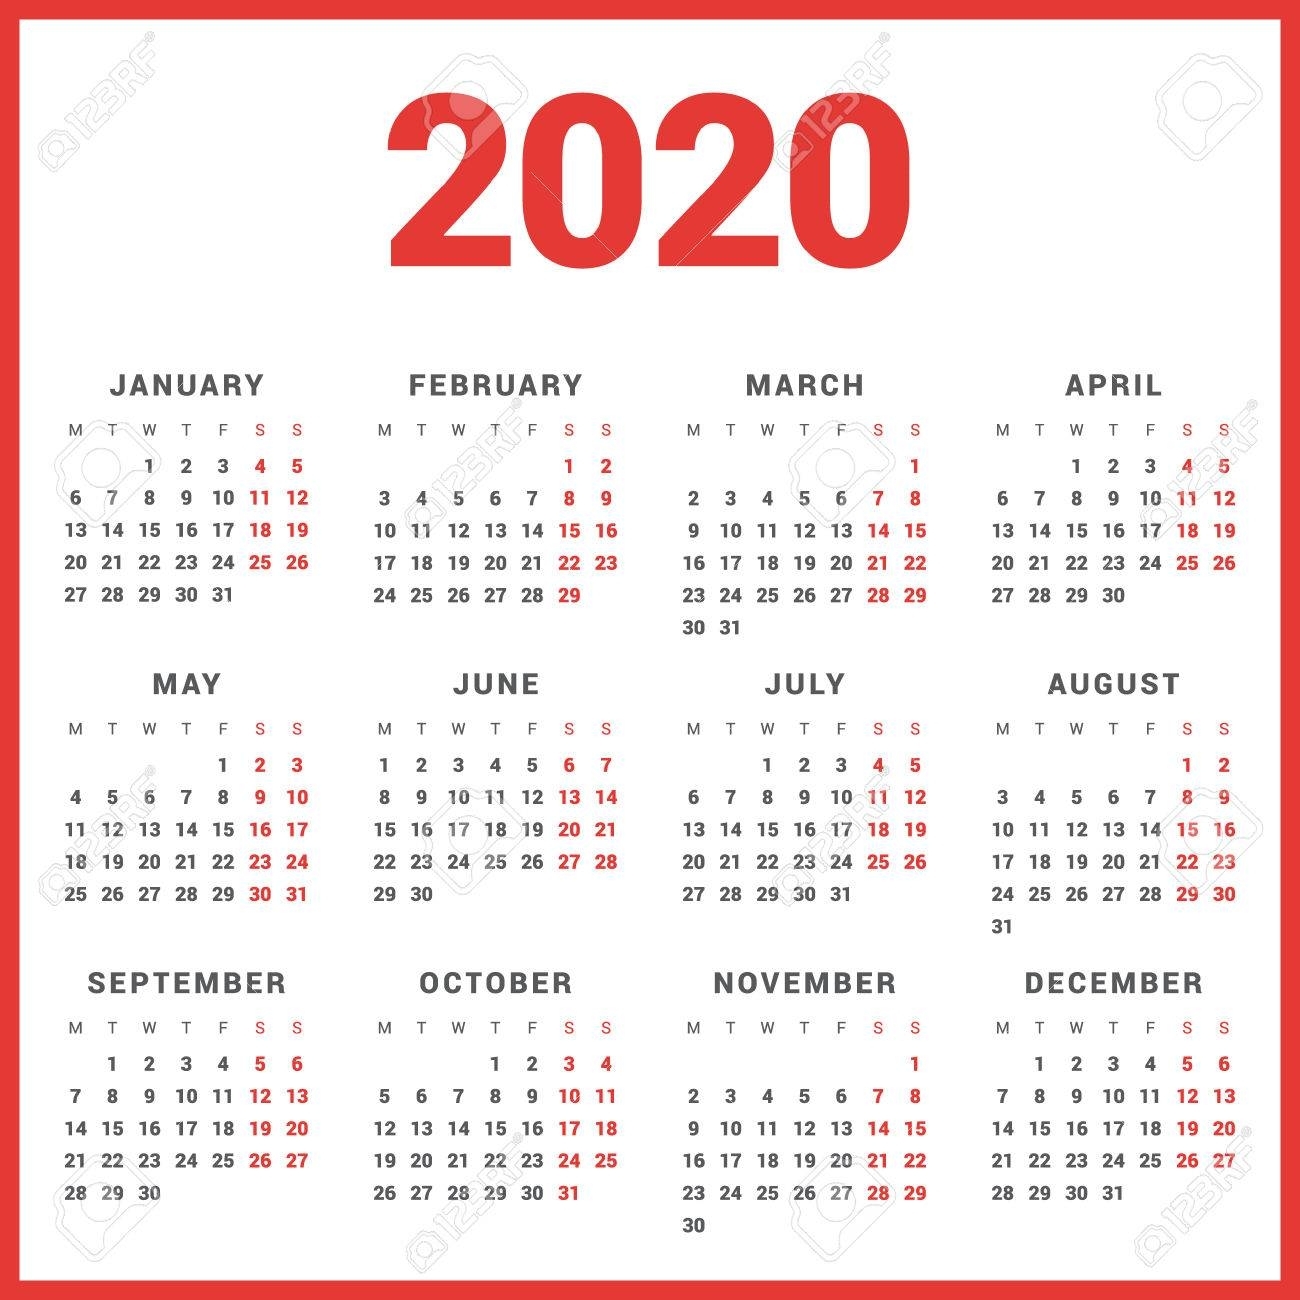 Calendar For 2020 Year On White Background. Week Starts Monday